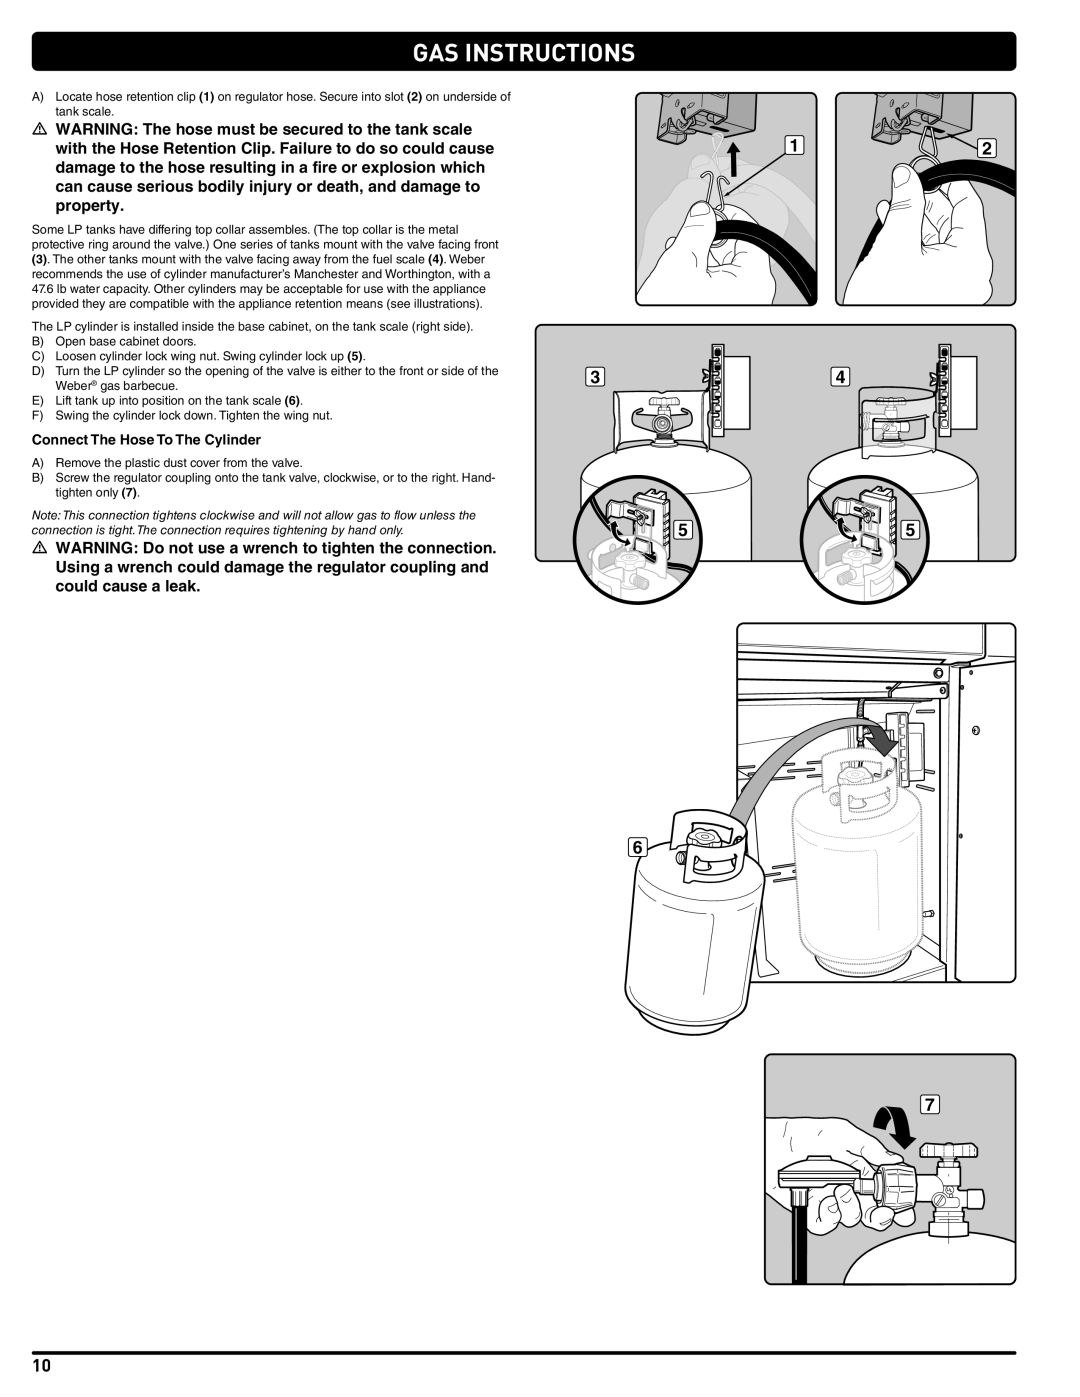 Summit 56214 manual Gas Instructions, Connect The Hose To The Cylinder 